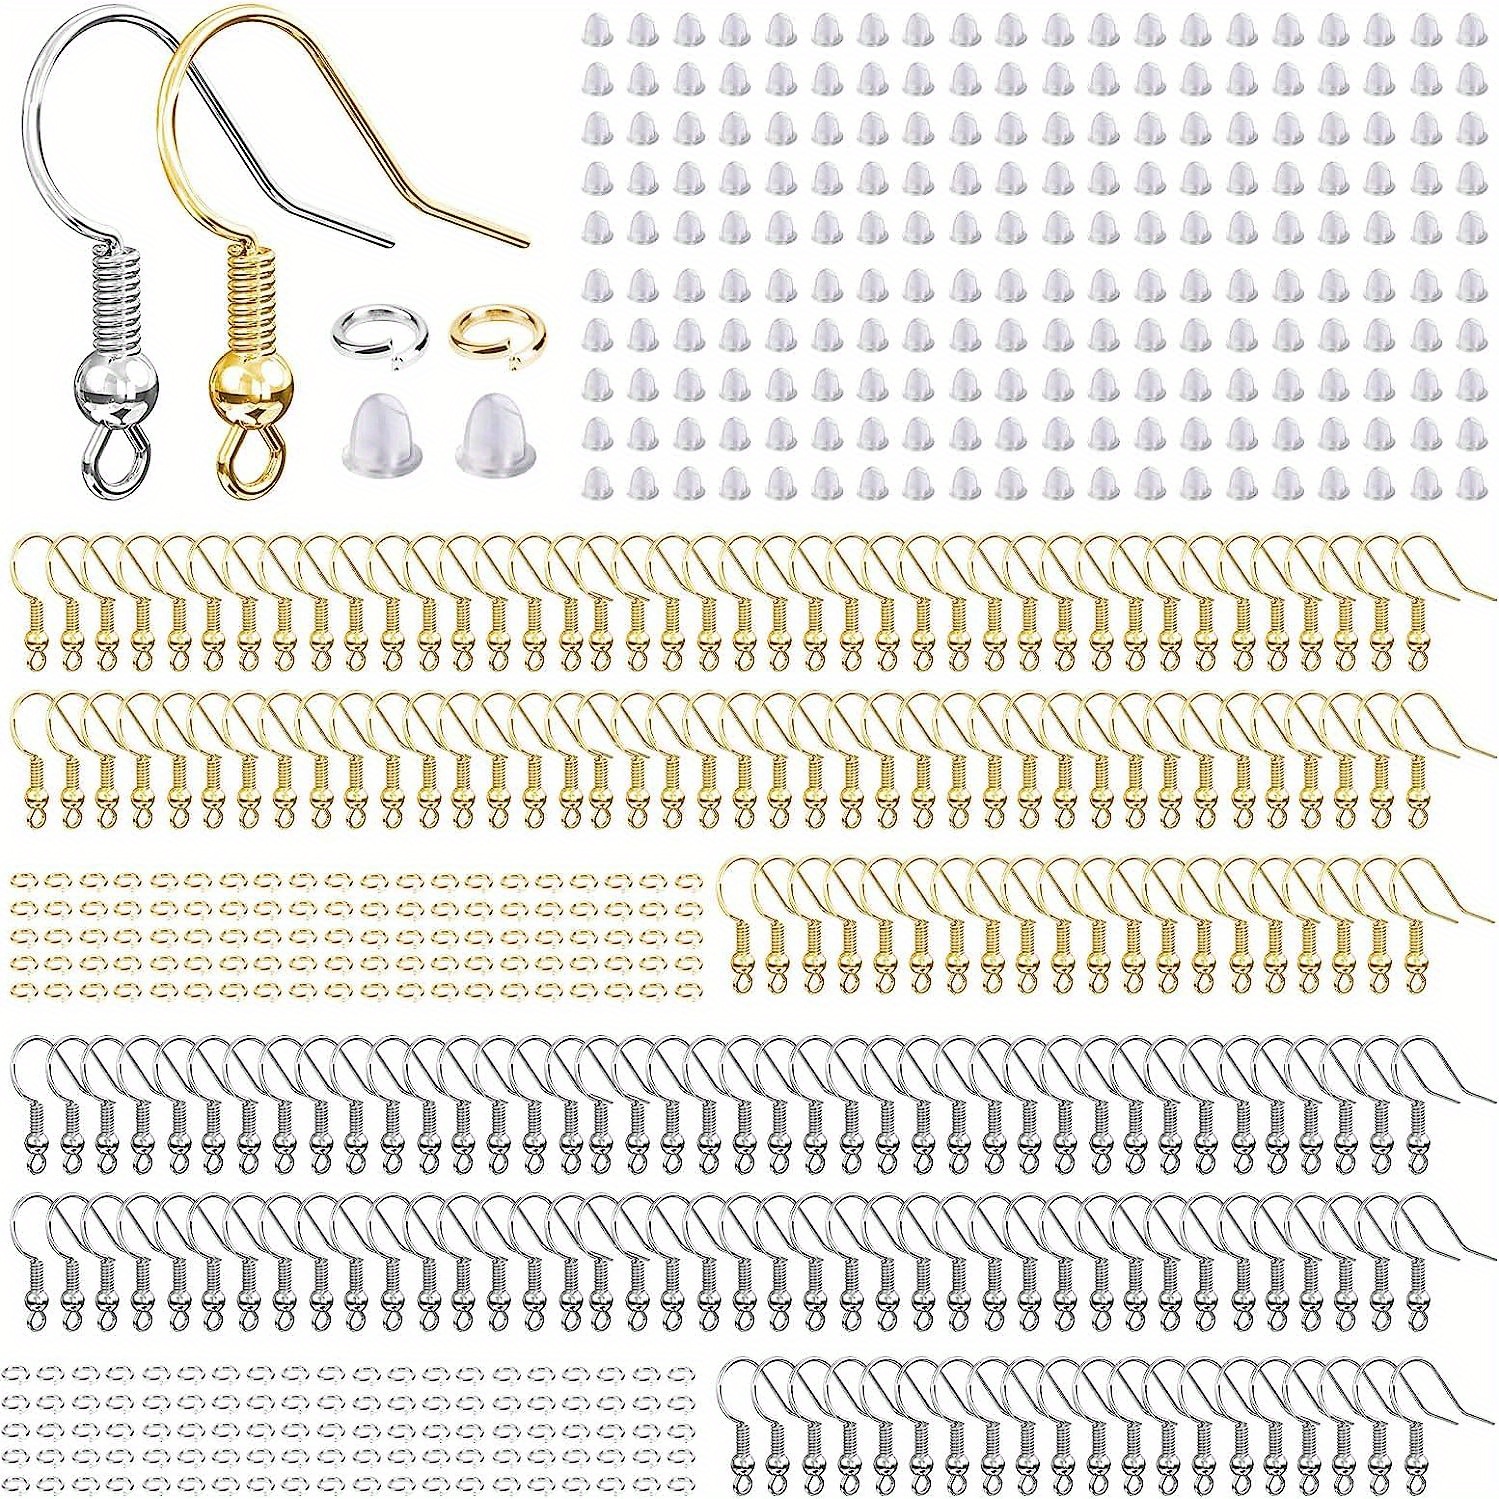 600pcs Hypoallergenic Earring Hooks, Antique Bronze Earring Making Kit, Earring Making Supplies with Earring Backs and Jump Rings for Jewelry Making